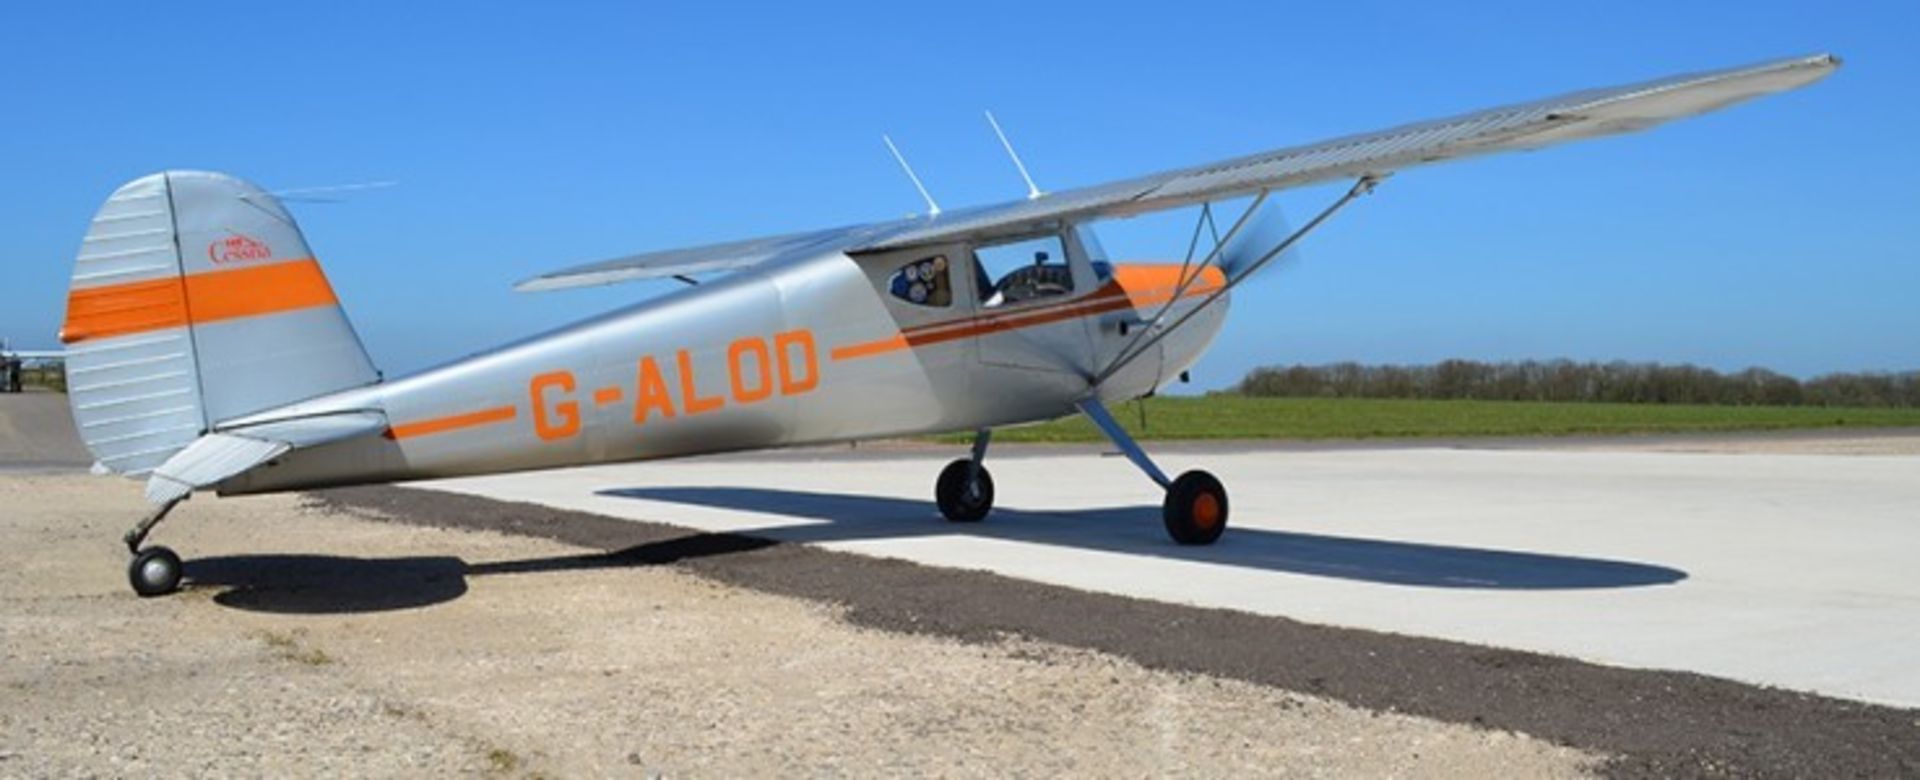 A stunning 1947 classic Cessna 140 just ready for some good old tail wheel fun. Theres not much to